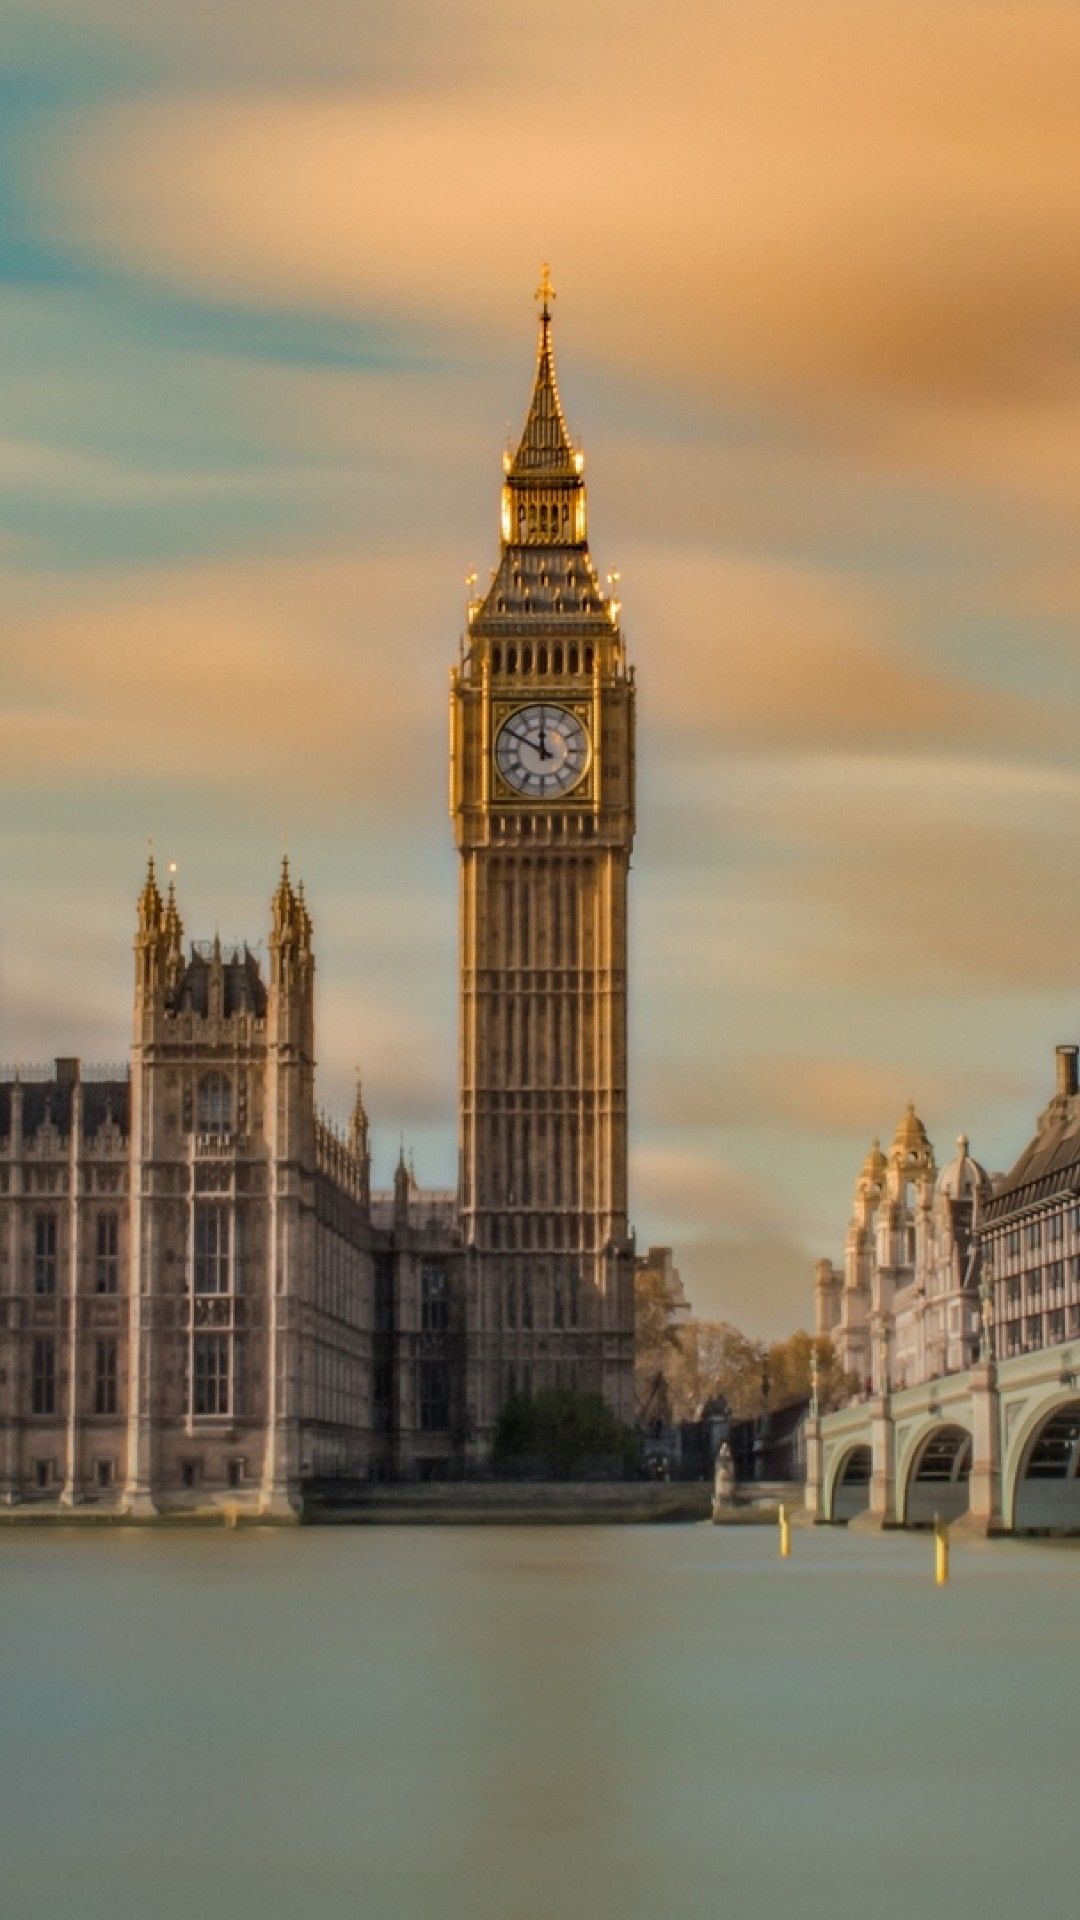 England iPhone wallpapers, Unique and creative, Mobile backgrounds, HD quality, 1080x1920 Full HD Handy